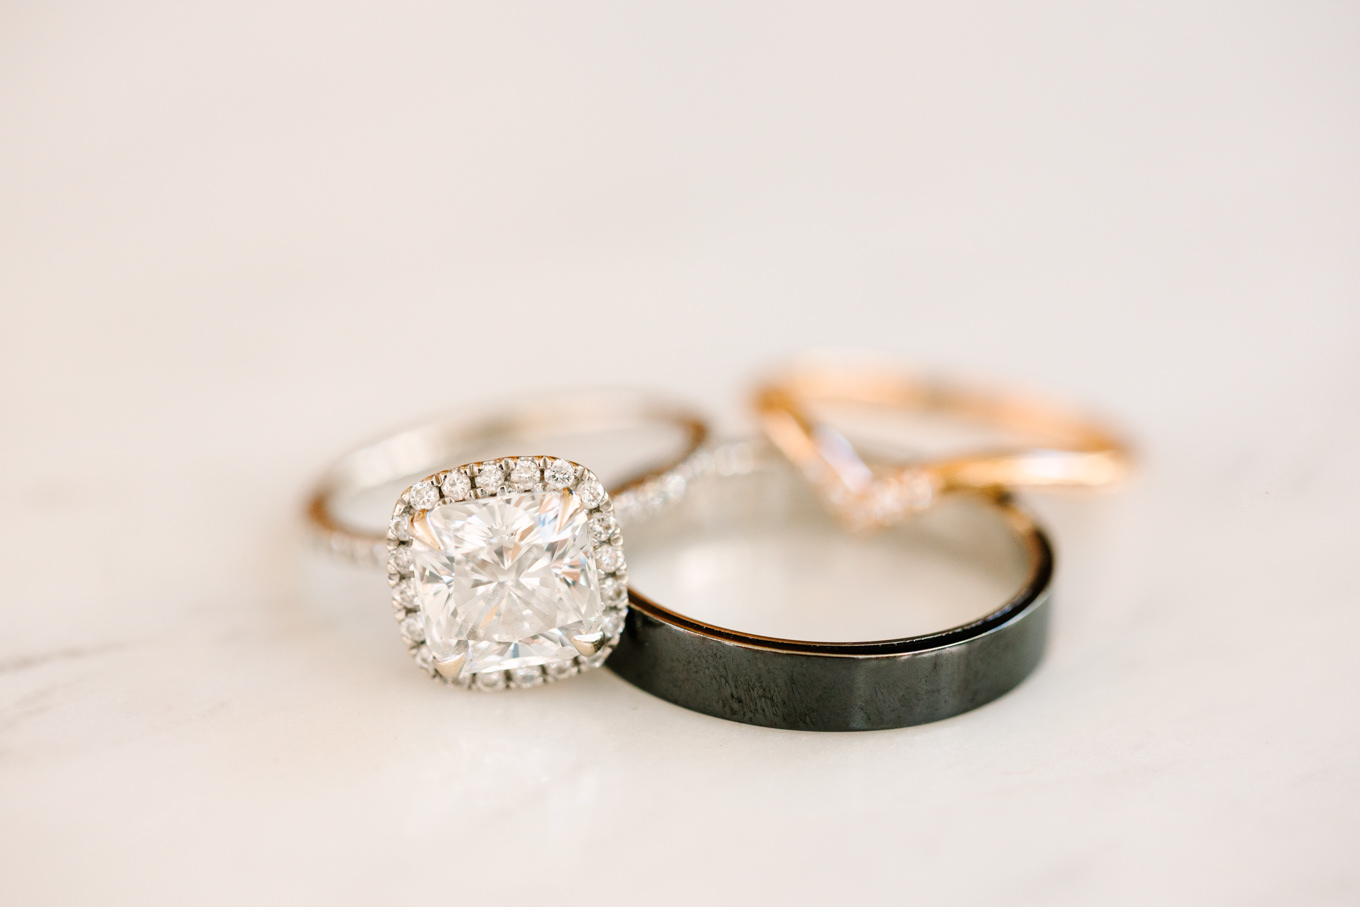 Wedding ring close ups | Pink and orange Lautner Compound wedding | Colorful Palm Springs wedding photography | #palmspringsphotographer #palmspringswedding #lautnercompound #southerncaliforniawedding  Source: Mary Costa Photography | Los Angeles